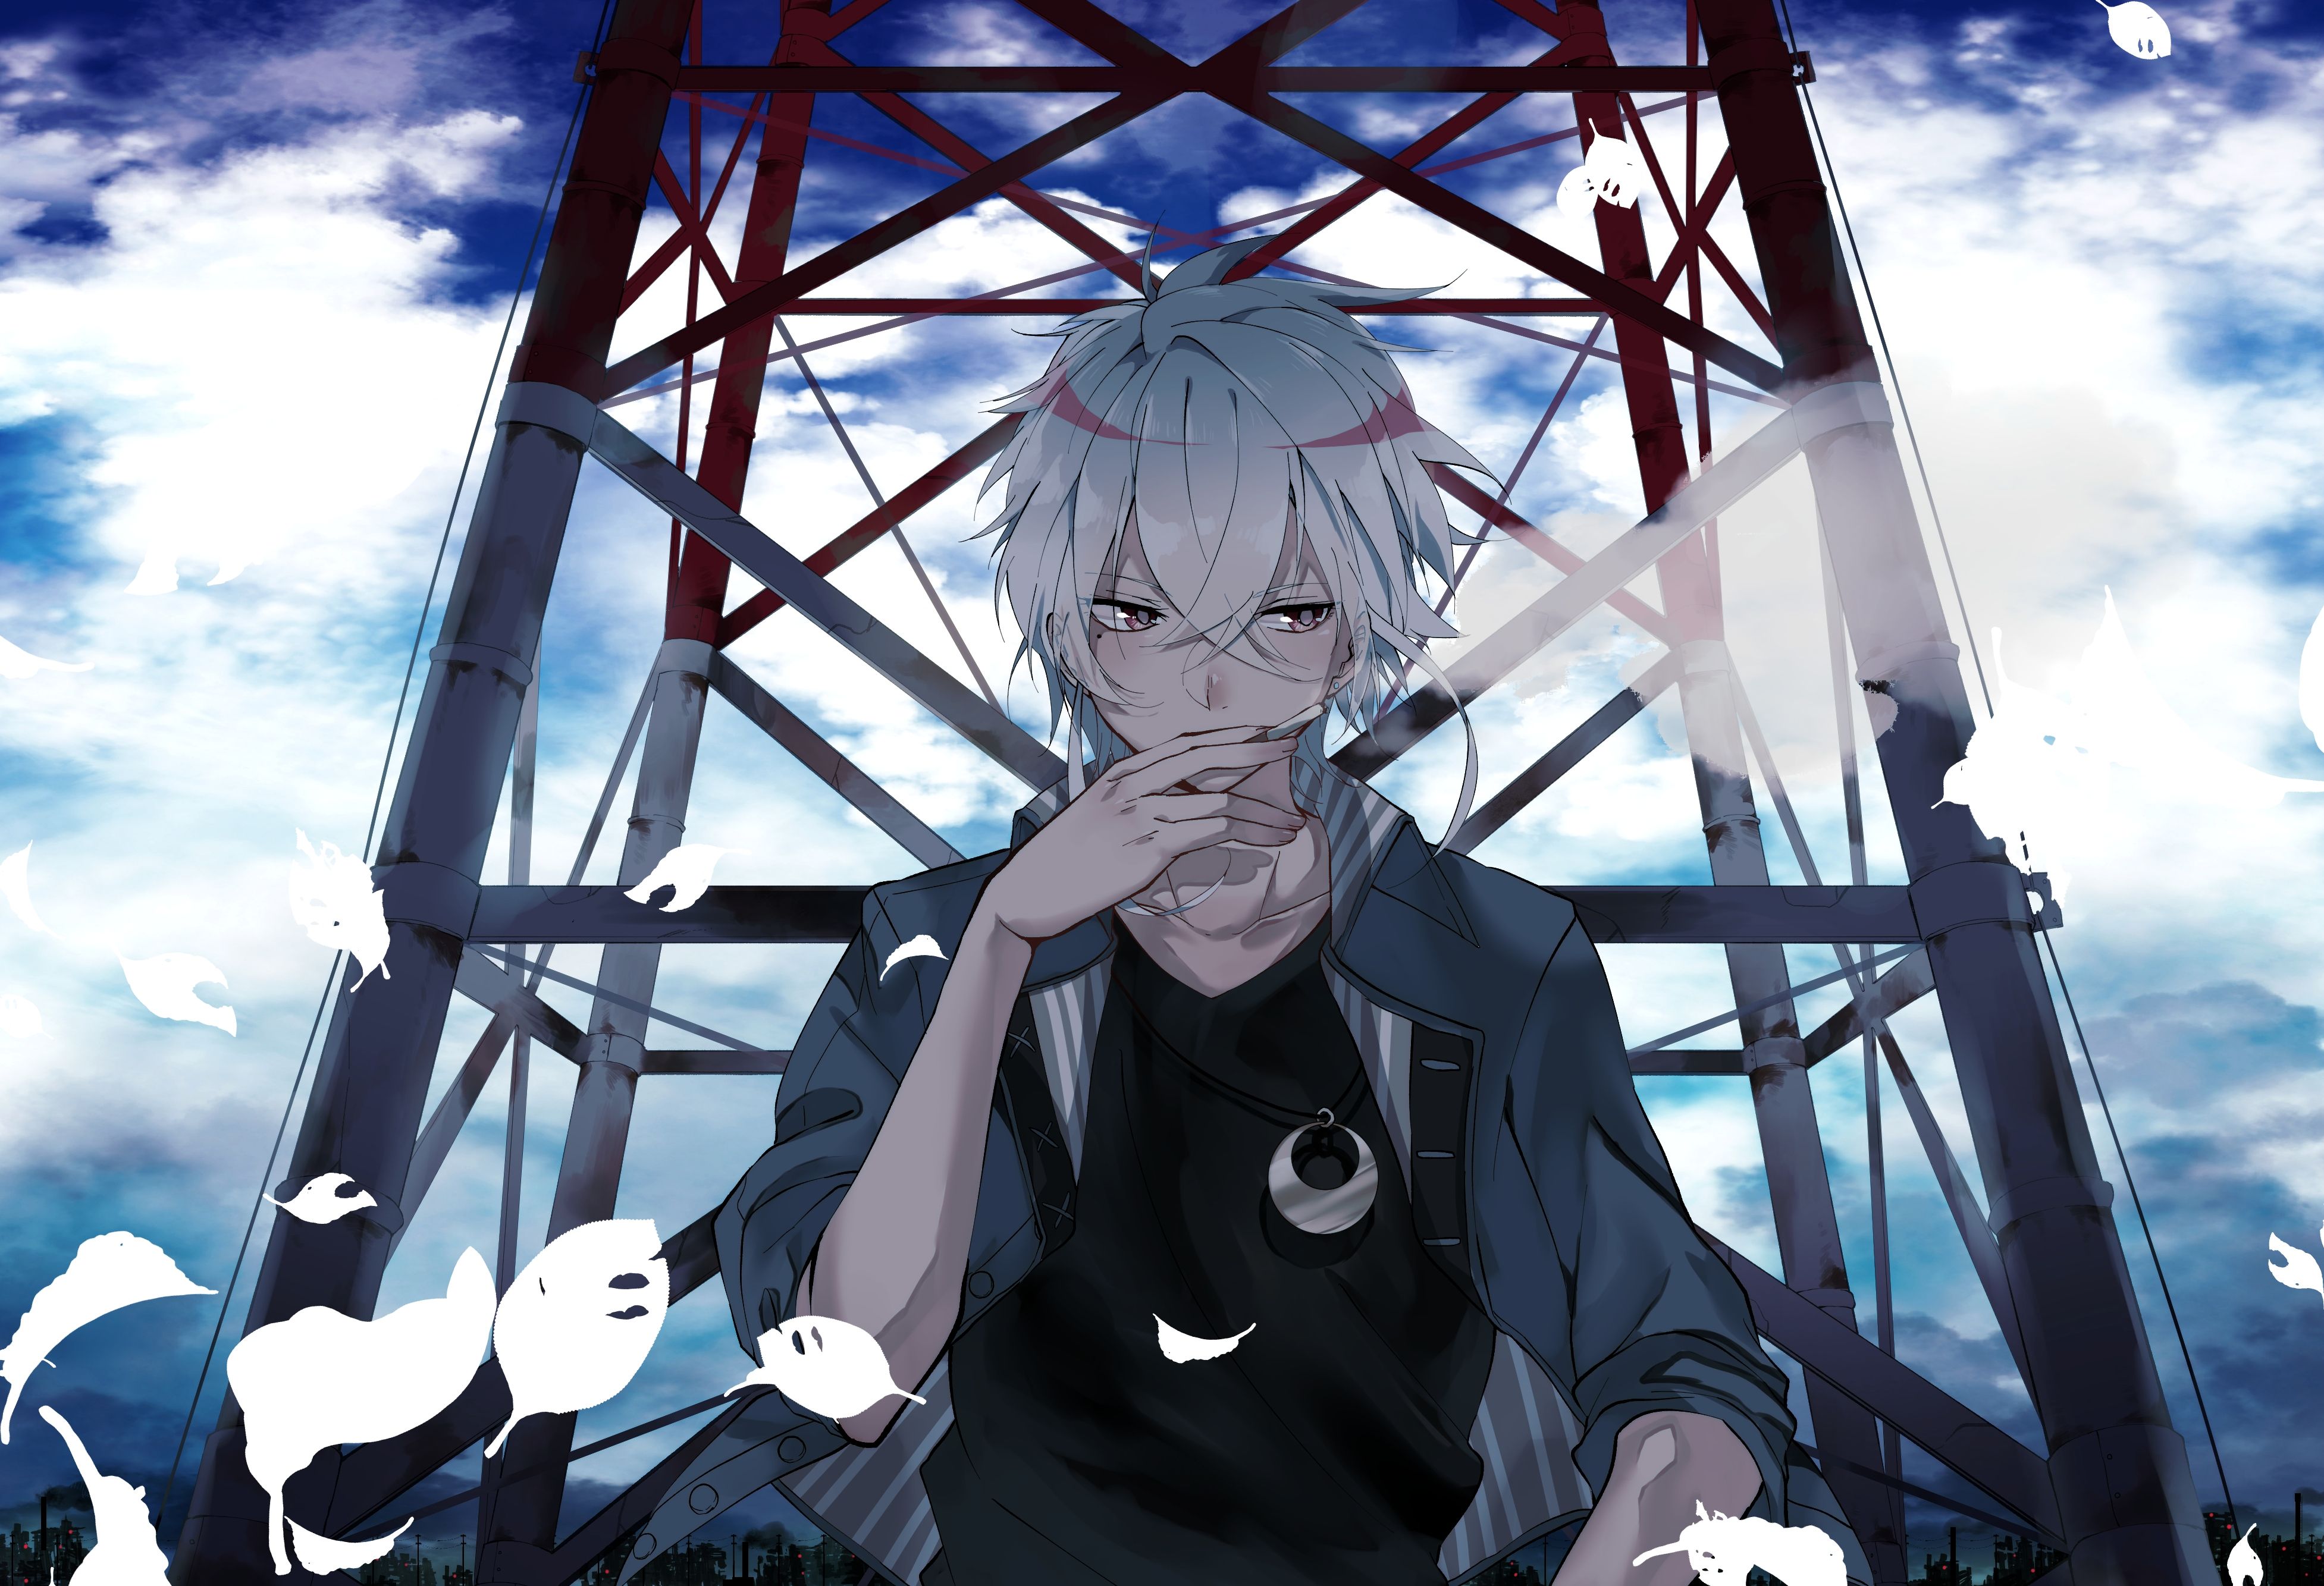 Wallpapers : smoking, tower, male, feathers, sky, clouds, anime, necklace, white hair, smoke 3907x2667